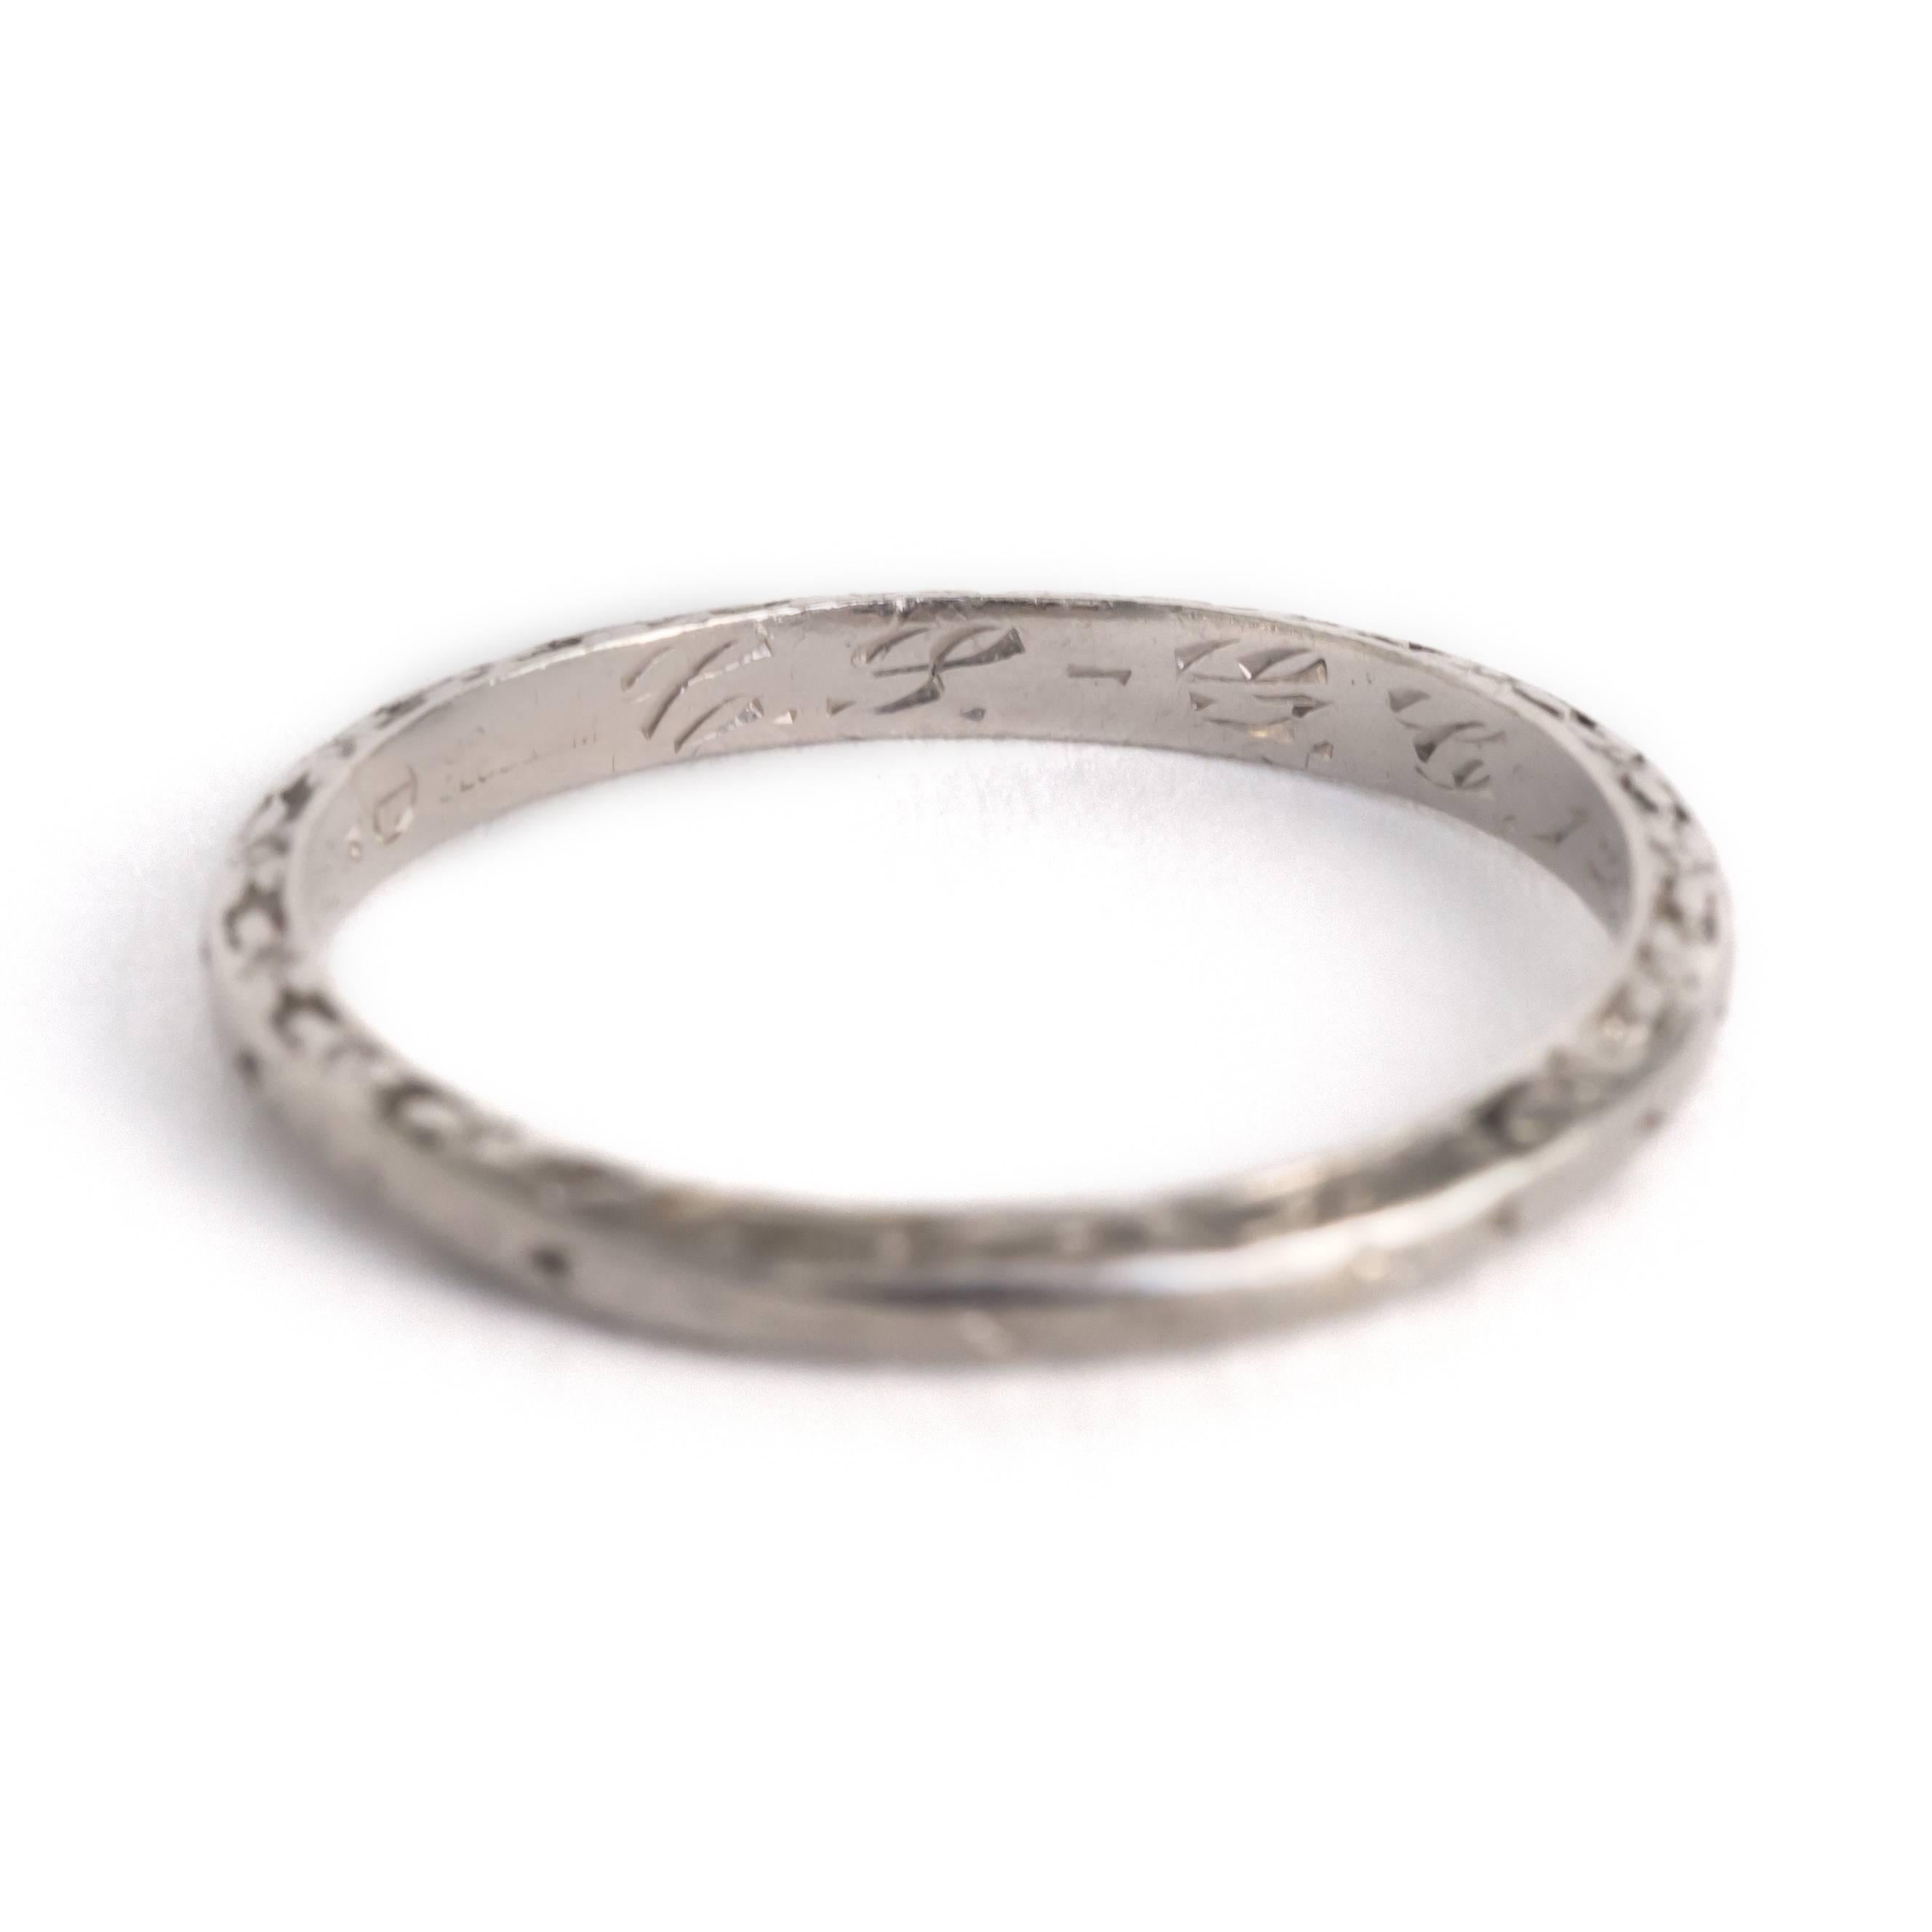 Item Details: 
Ring Size: Approximately 7.45
Metal Type: Platinum
Weight: 3.0 grams

Engraving: C.P. - G.C. 12-8-27

Finger to Top of Stone Measurement: 1.48mm